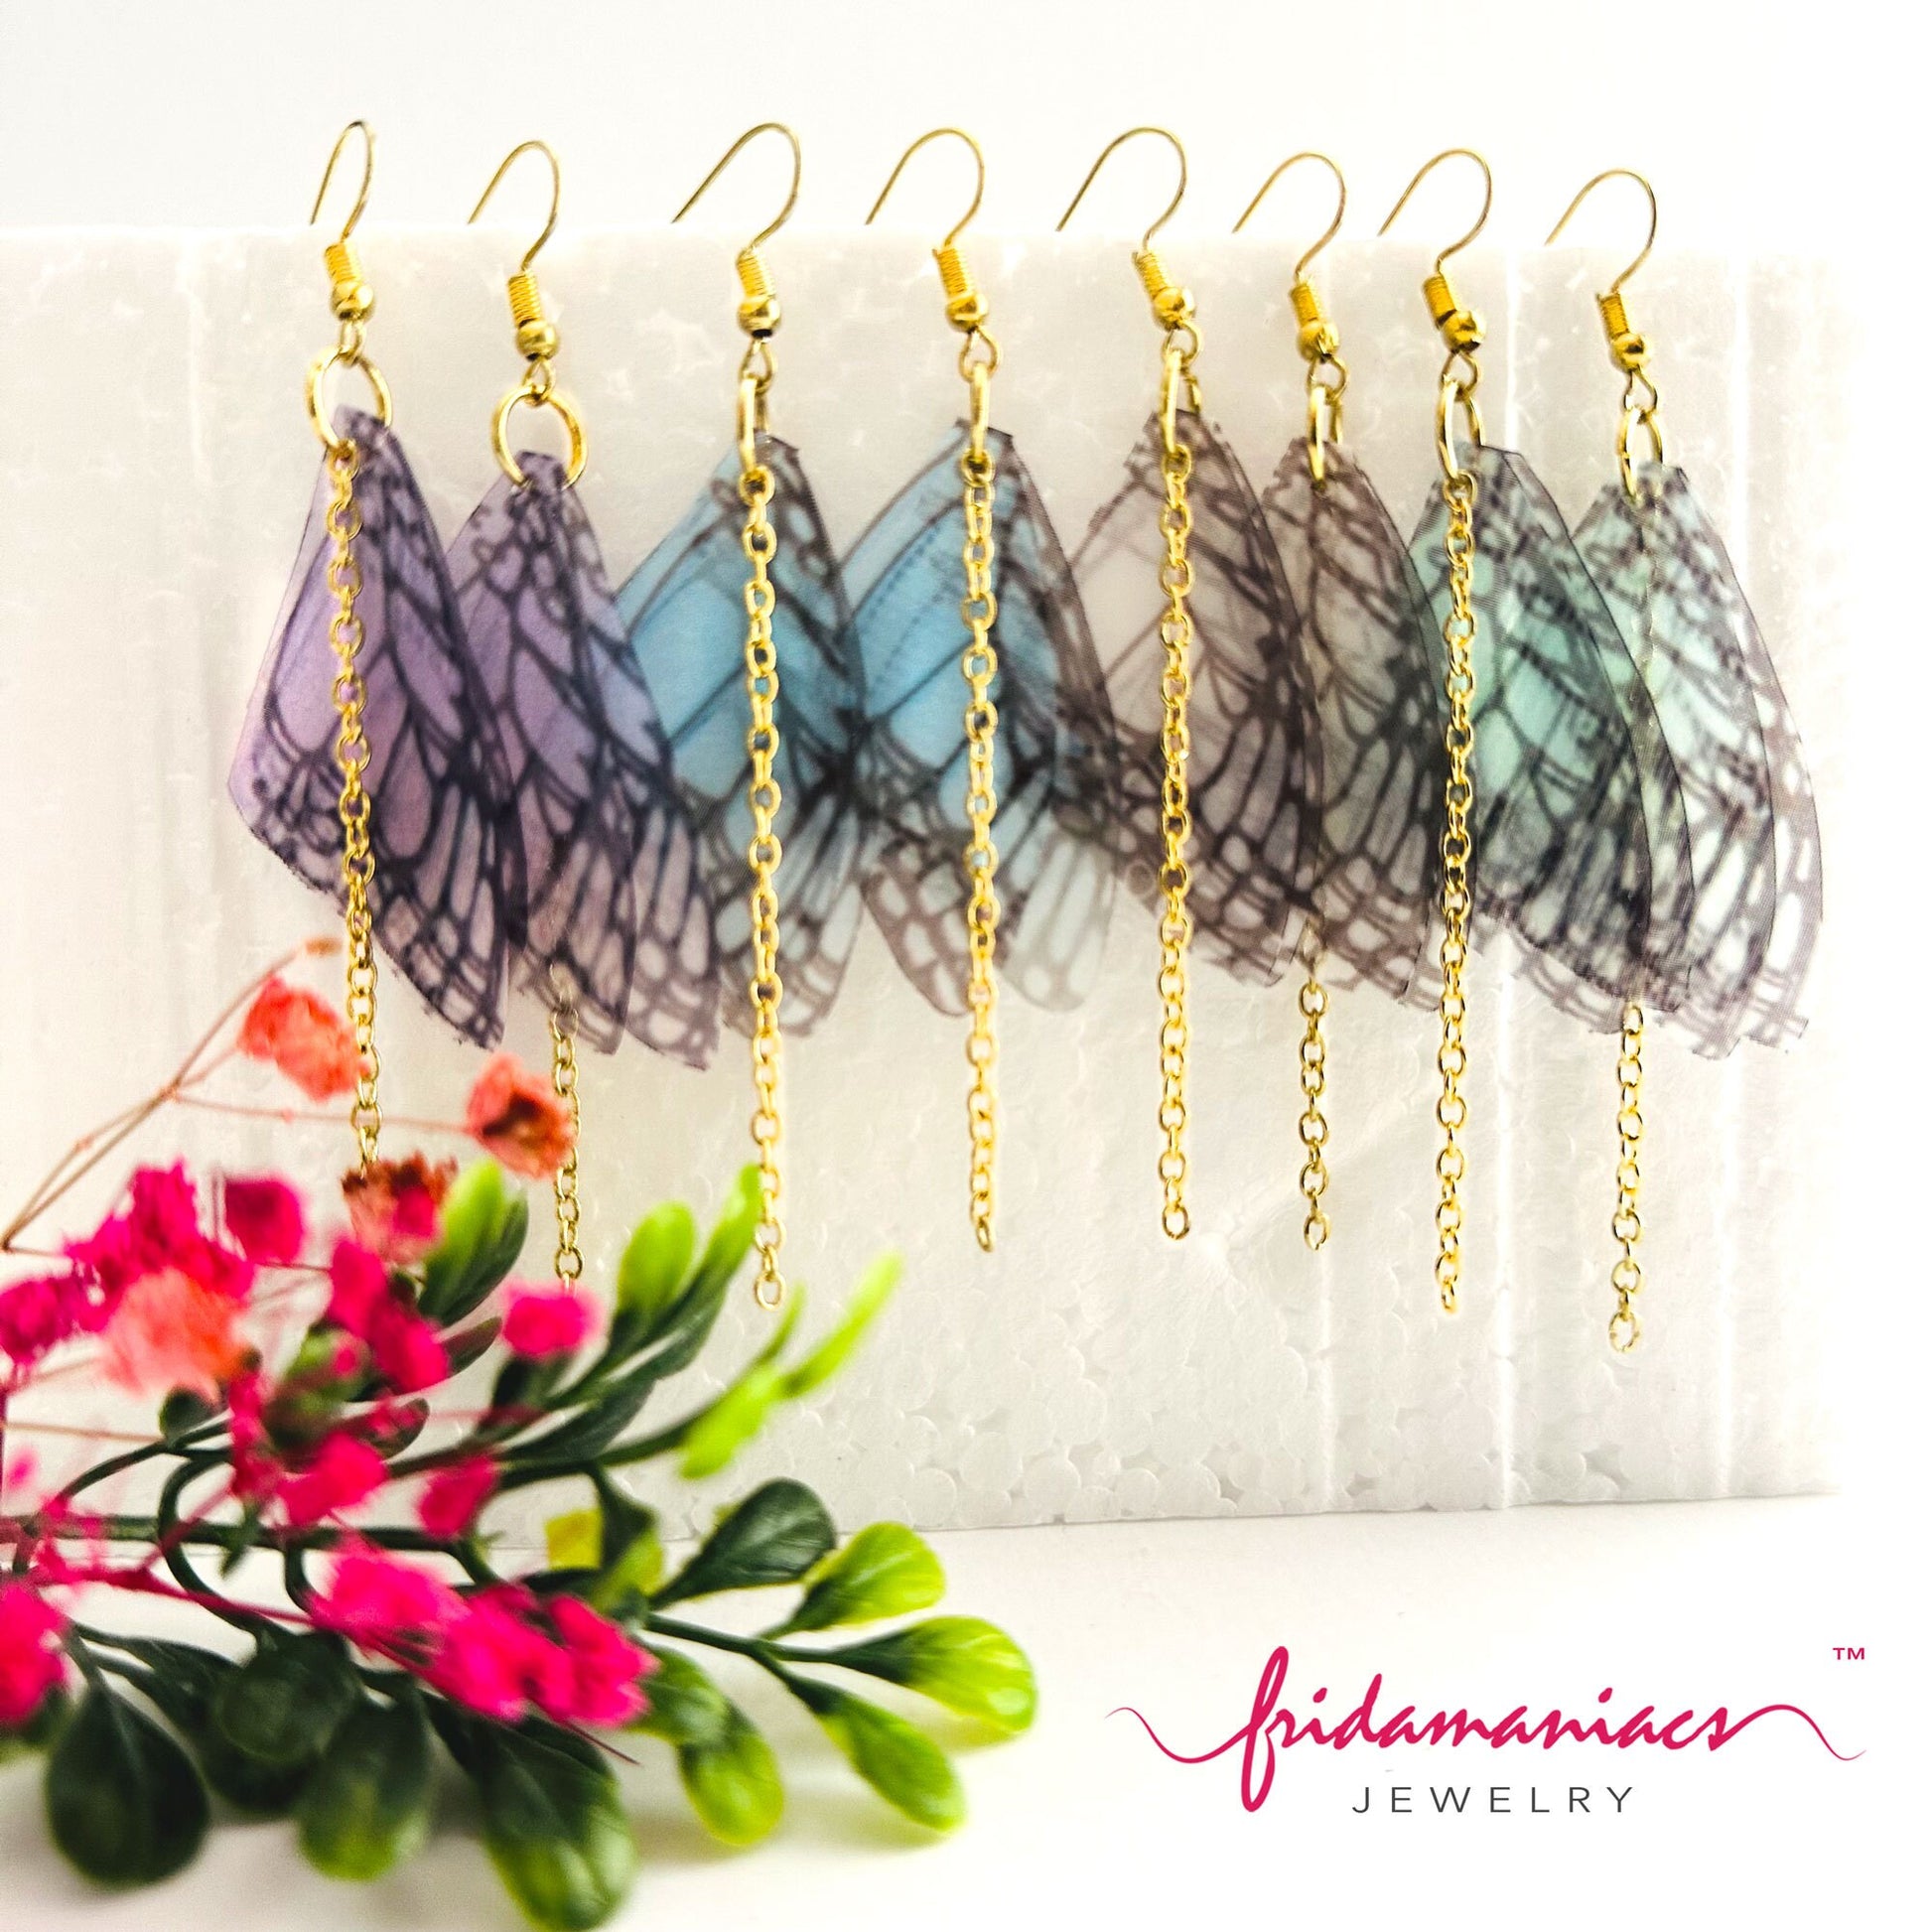 Butterfly Wings Earrings Handcrafted Gold Long Chain Translucid Silk Multi-Colored Butterfly Aretes Mariposa Mexican Jewelry Frida Inspired